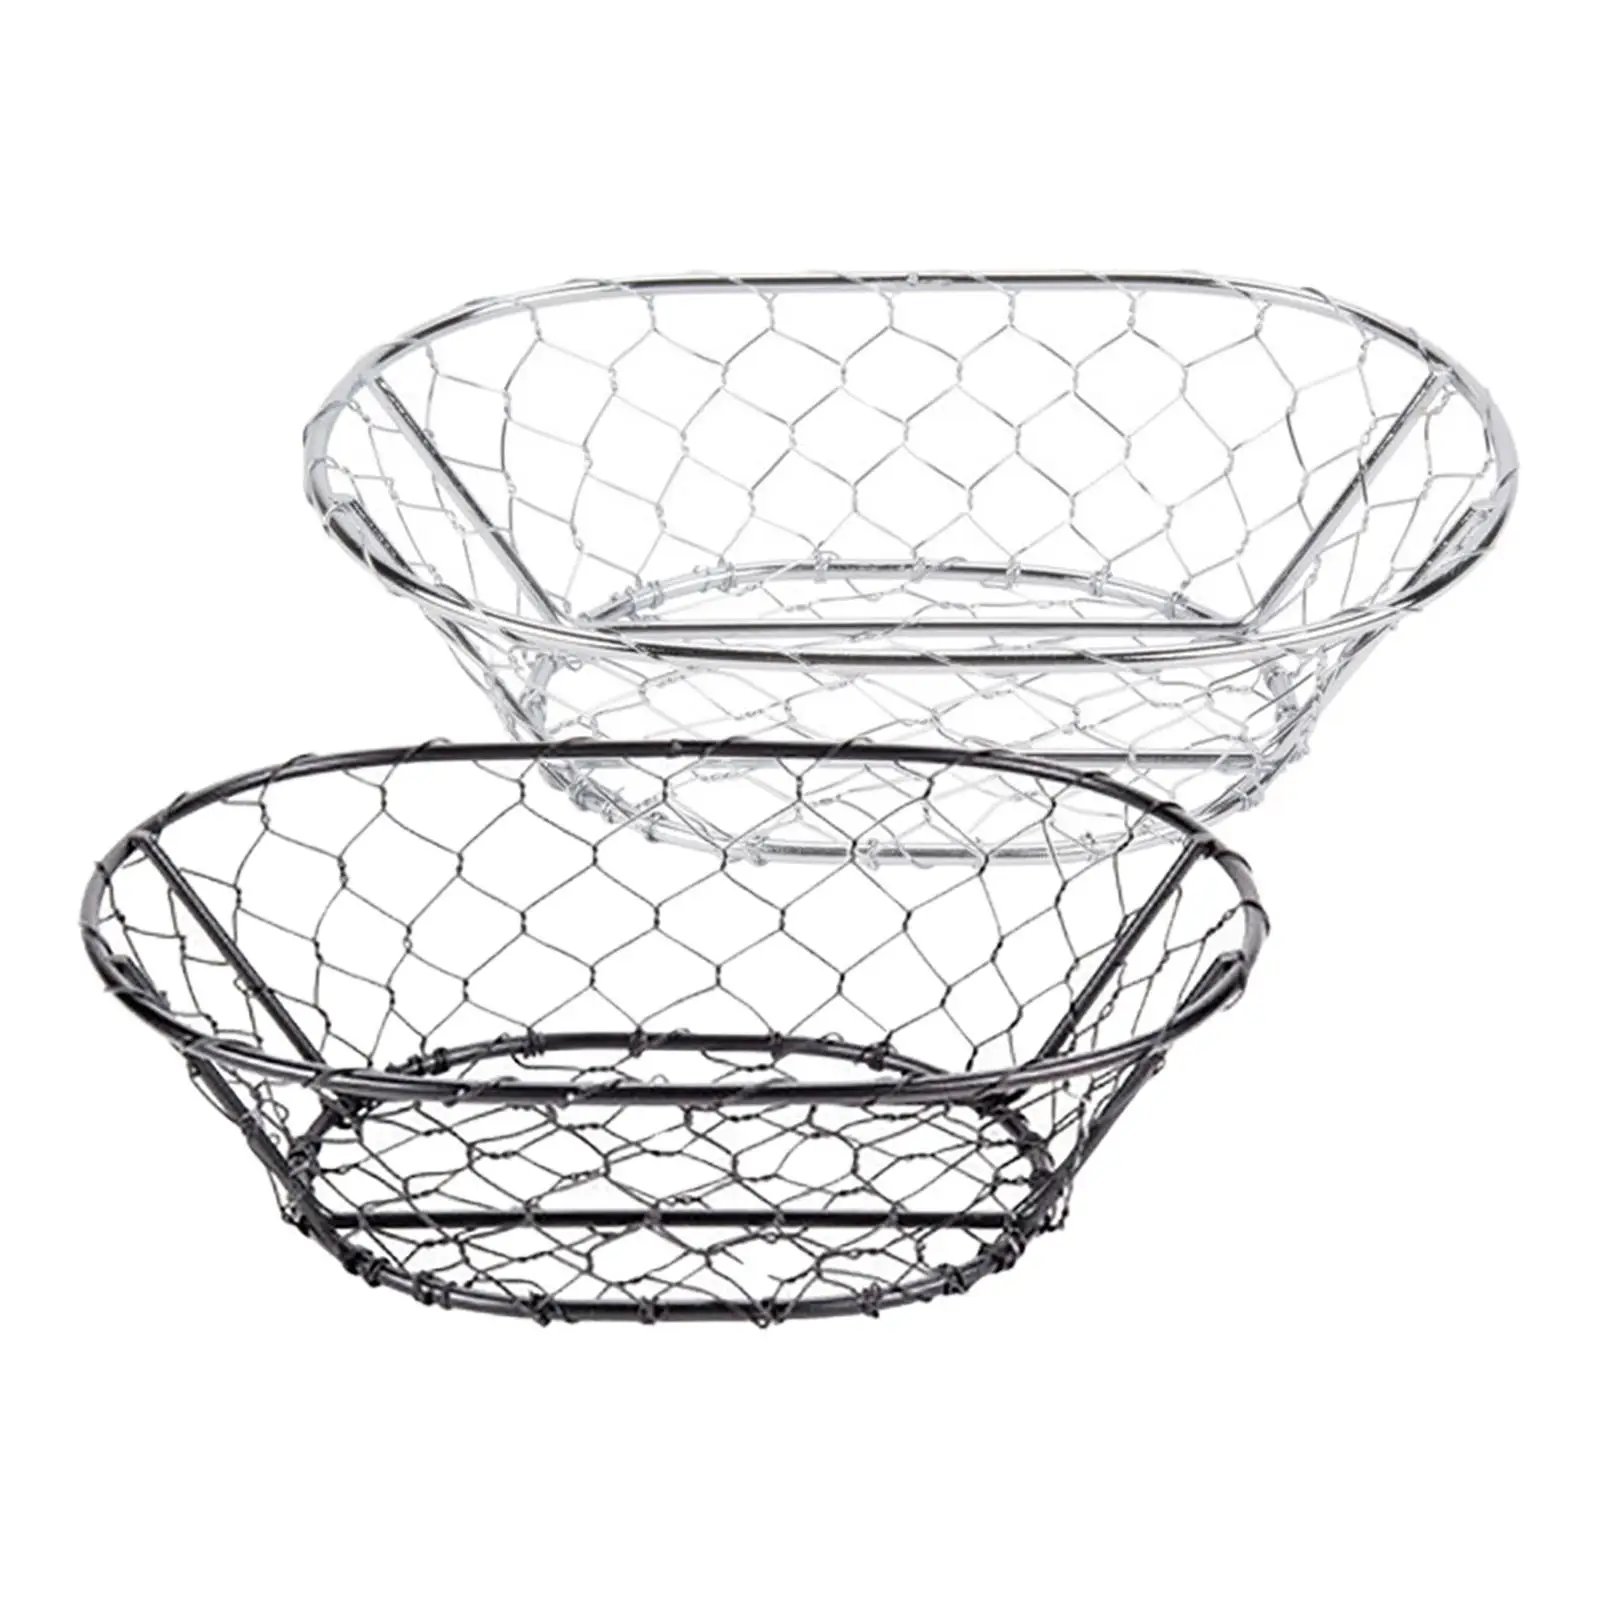 Iron Wire Basket Wire Iron Fruit Bowl Storage Stand Vegetable Bowl Holder Rack Vegetable Plate Holder Container Egg Basket